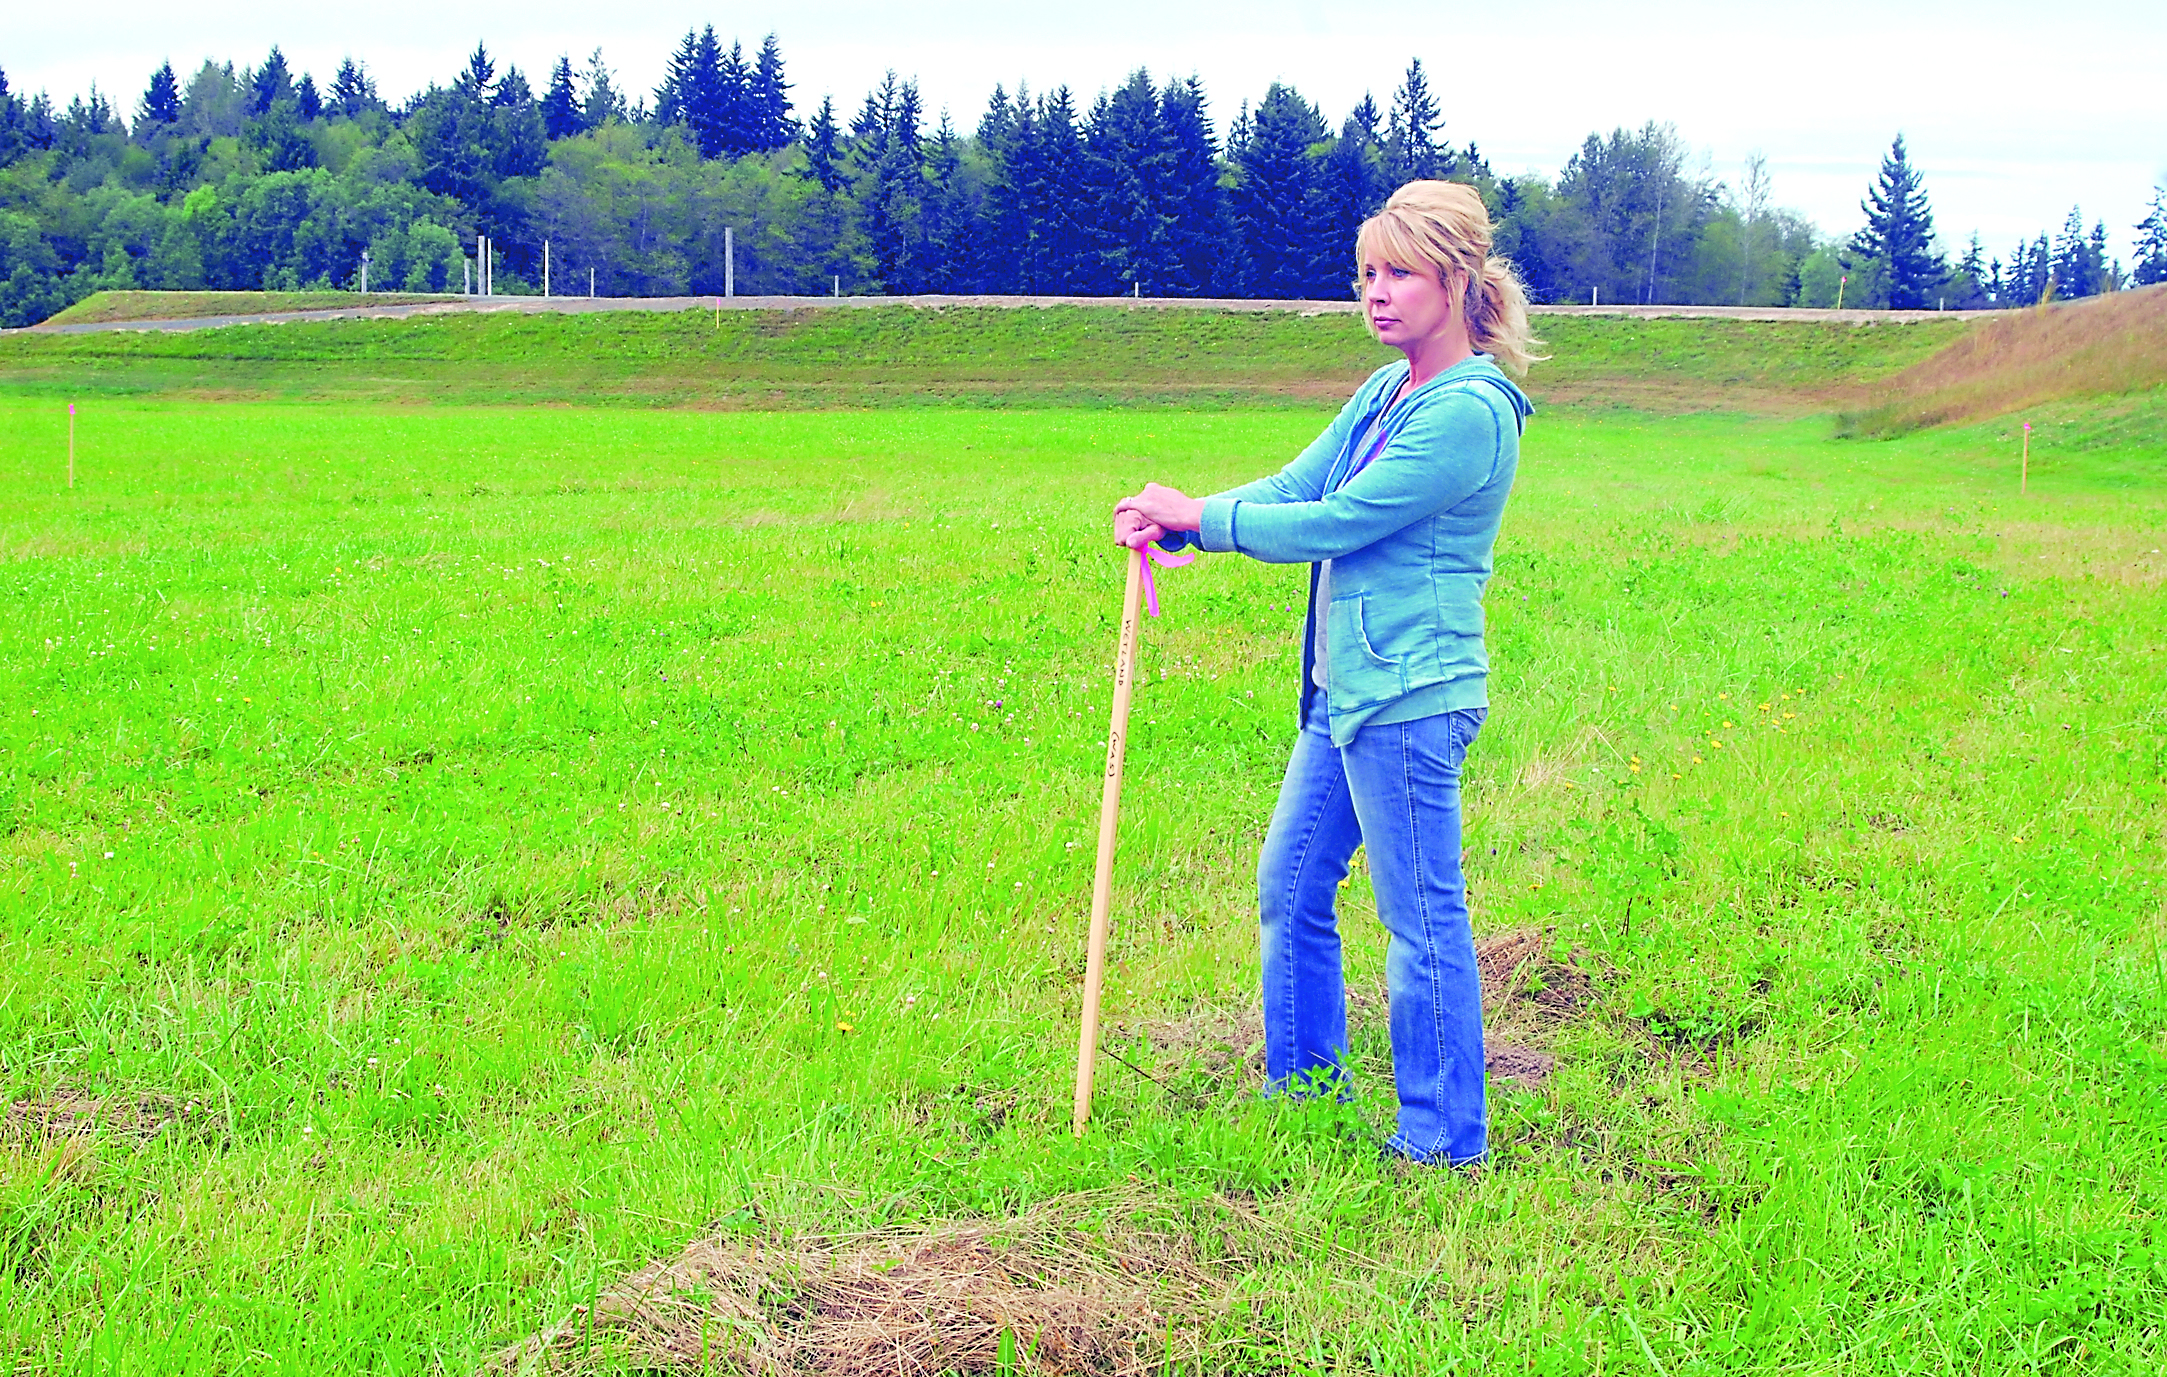 Kelie Morrison stands next to a stake marking the boundary of designated wetland next to the sprint boat track at the Extreme Sports Park on the west edge of Port Angeles — an area that is identical to topography outside the wetland zone.  -- Photo by Keith Thorpe/Peninsula Daily News